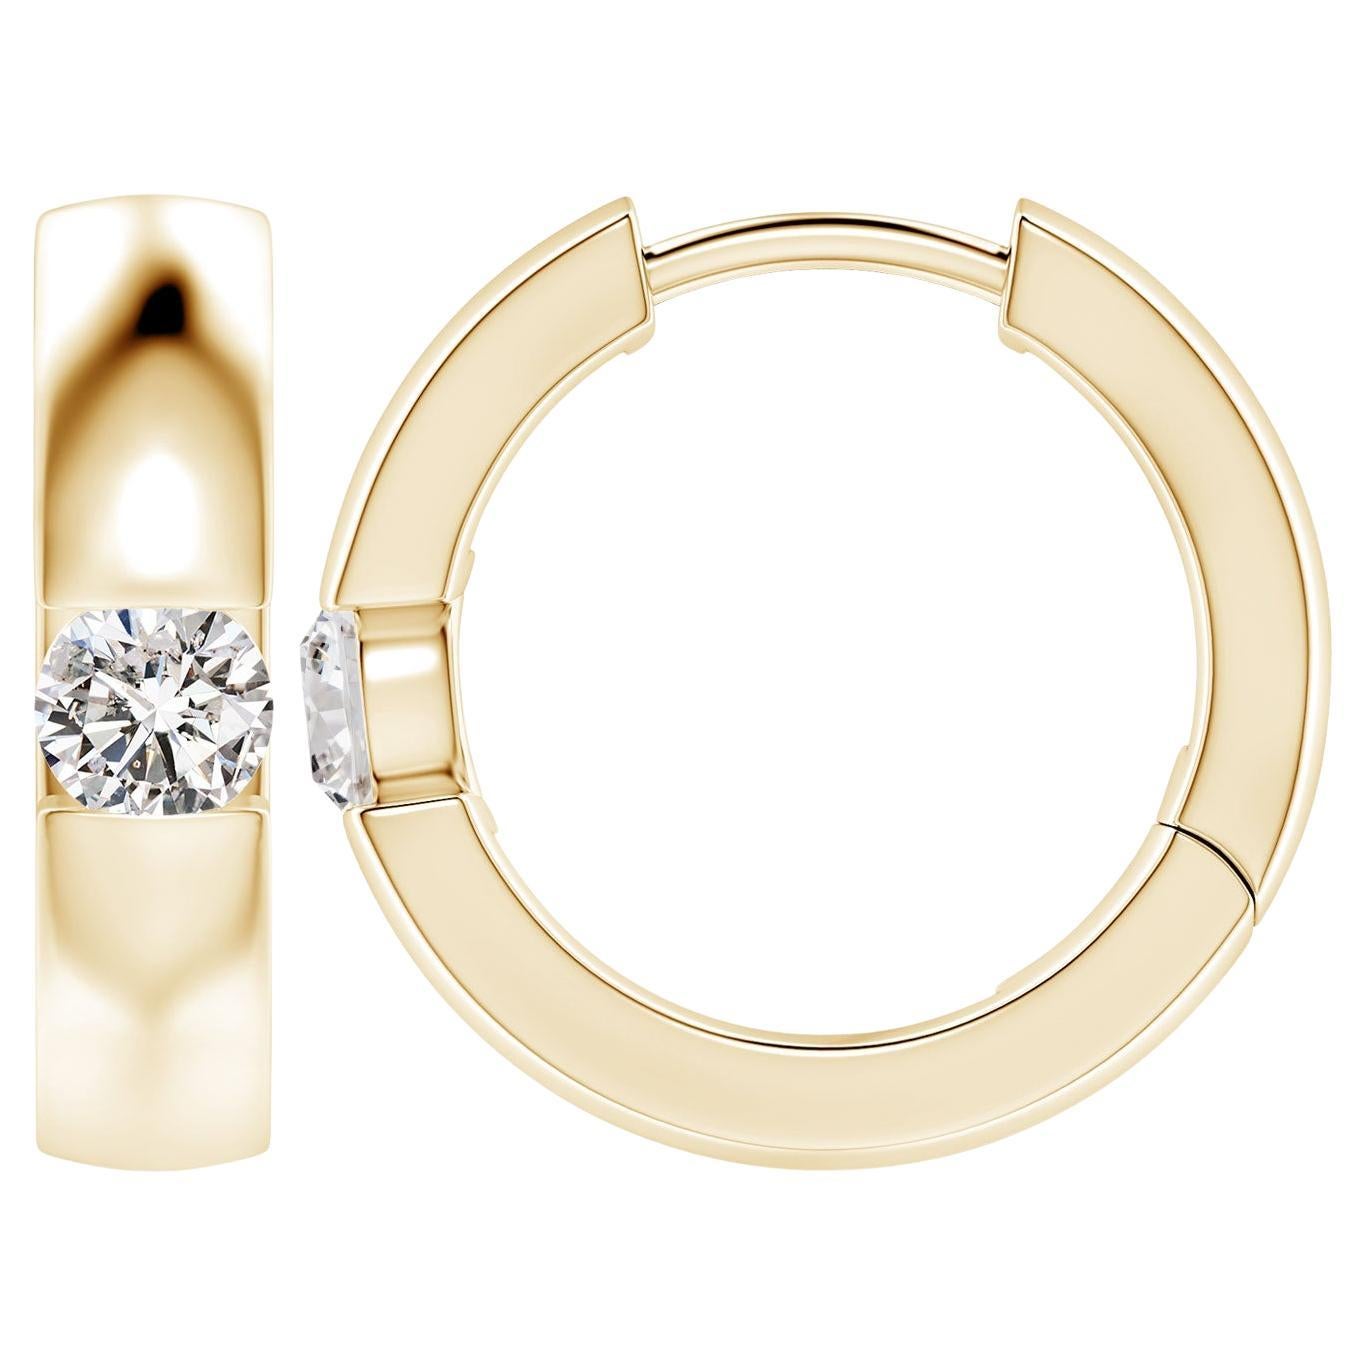 Natural Round 0.35ct Diamond Hoop Earrings in 14K Yellow Gold (Color-I-J)